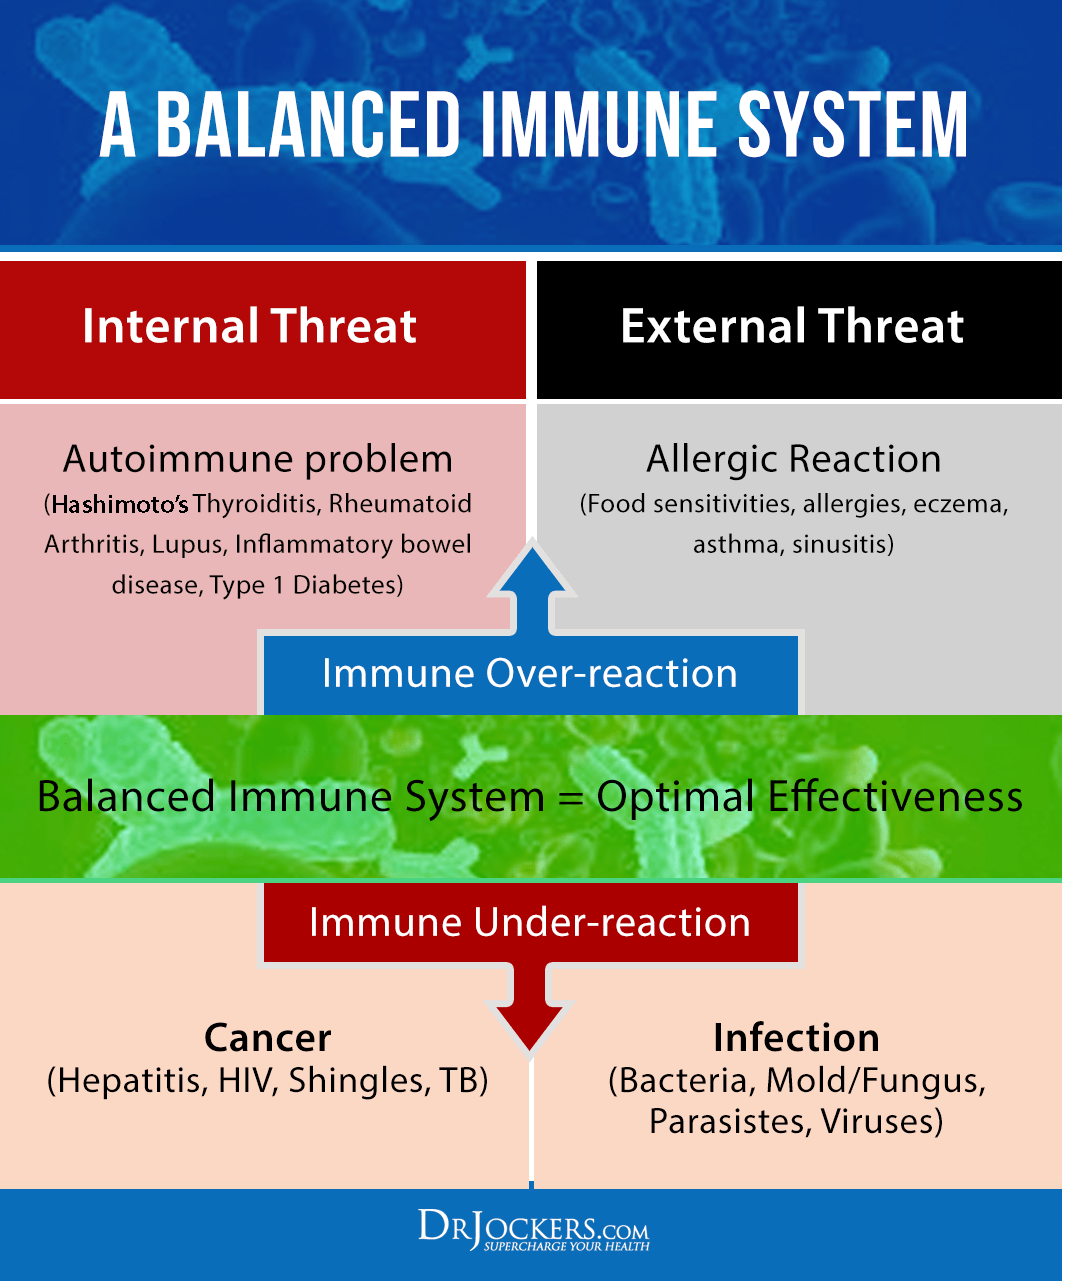 immune, 7 Strategies to Boost Your Immune System